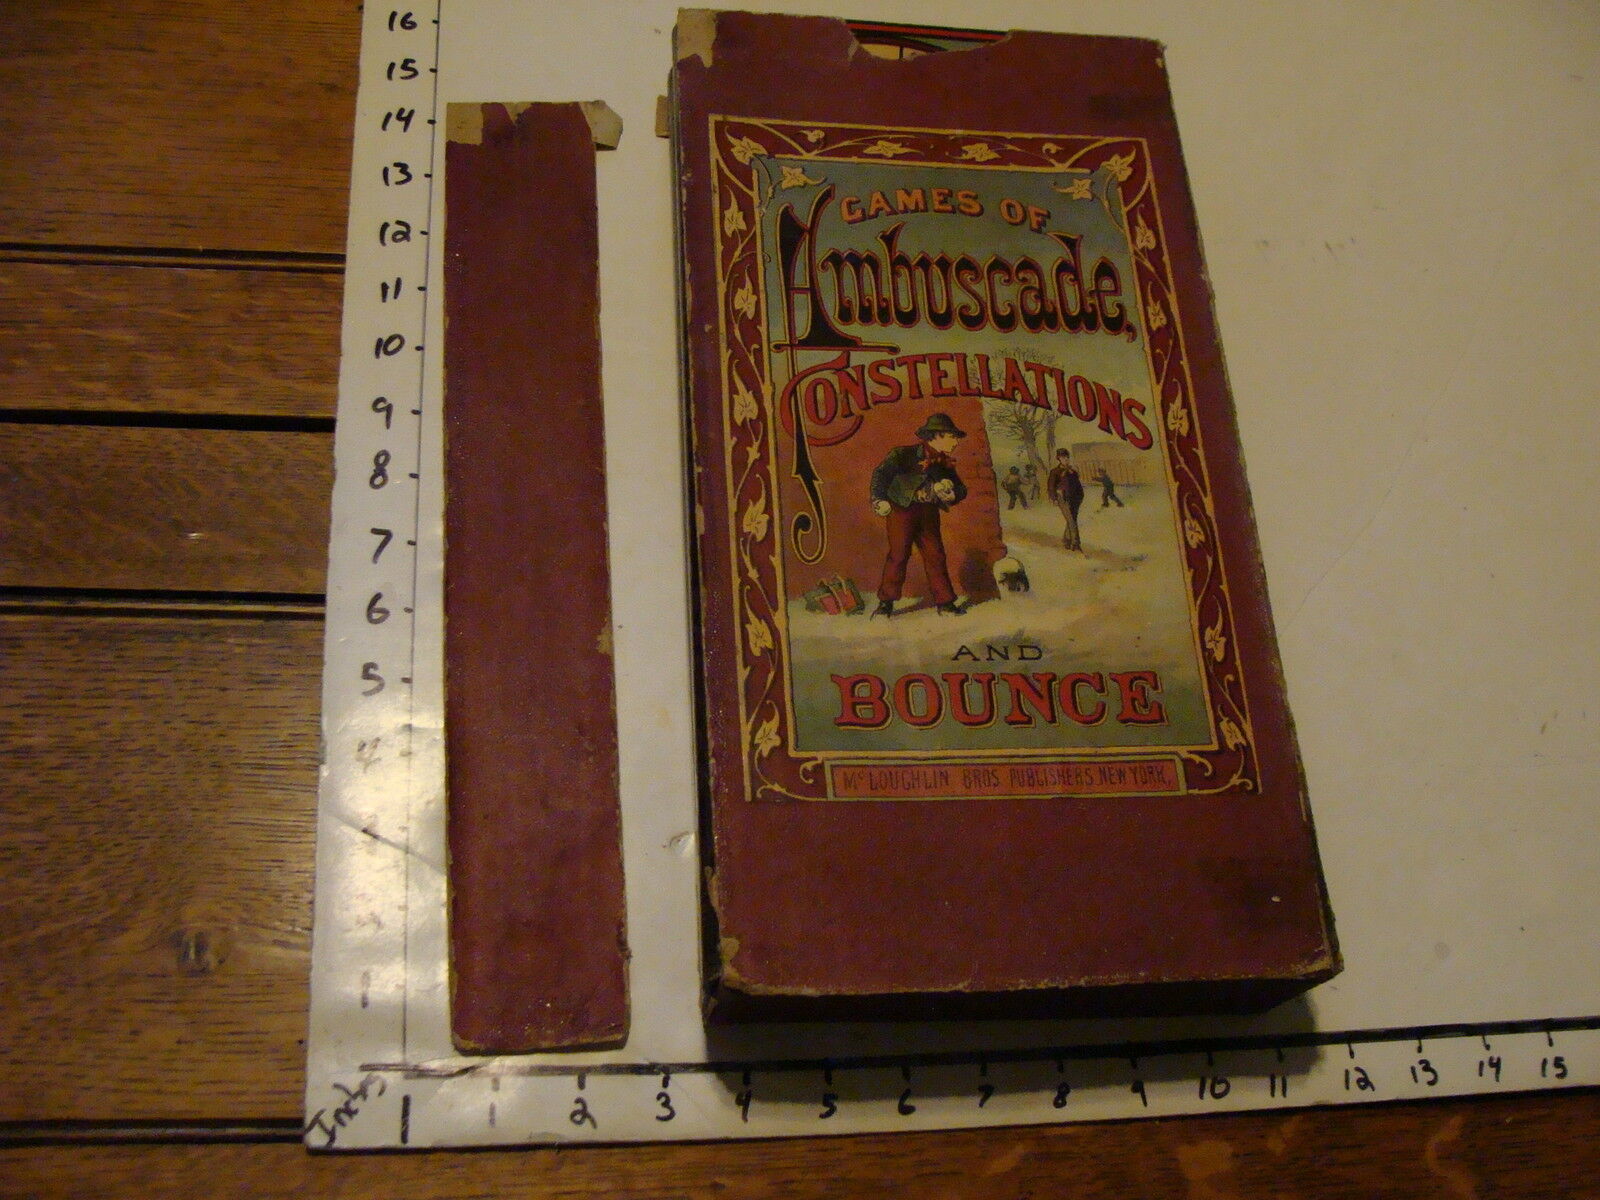 Vintage game set: 1880 GAMES OF AMBUSCADE, CONSTELLATIONS AND BOUNCE McLoughlin